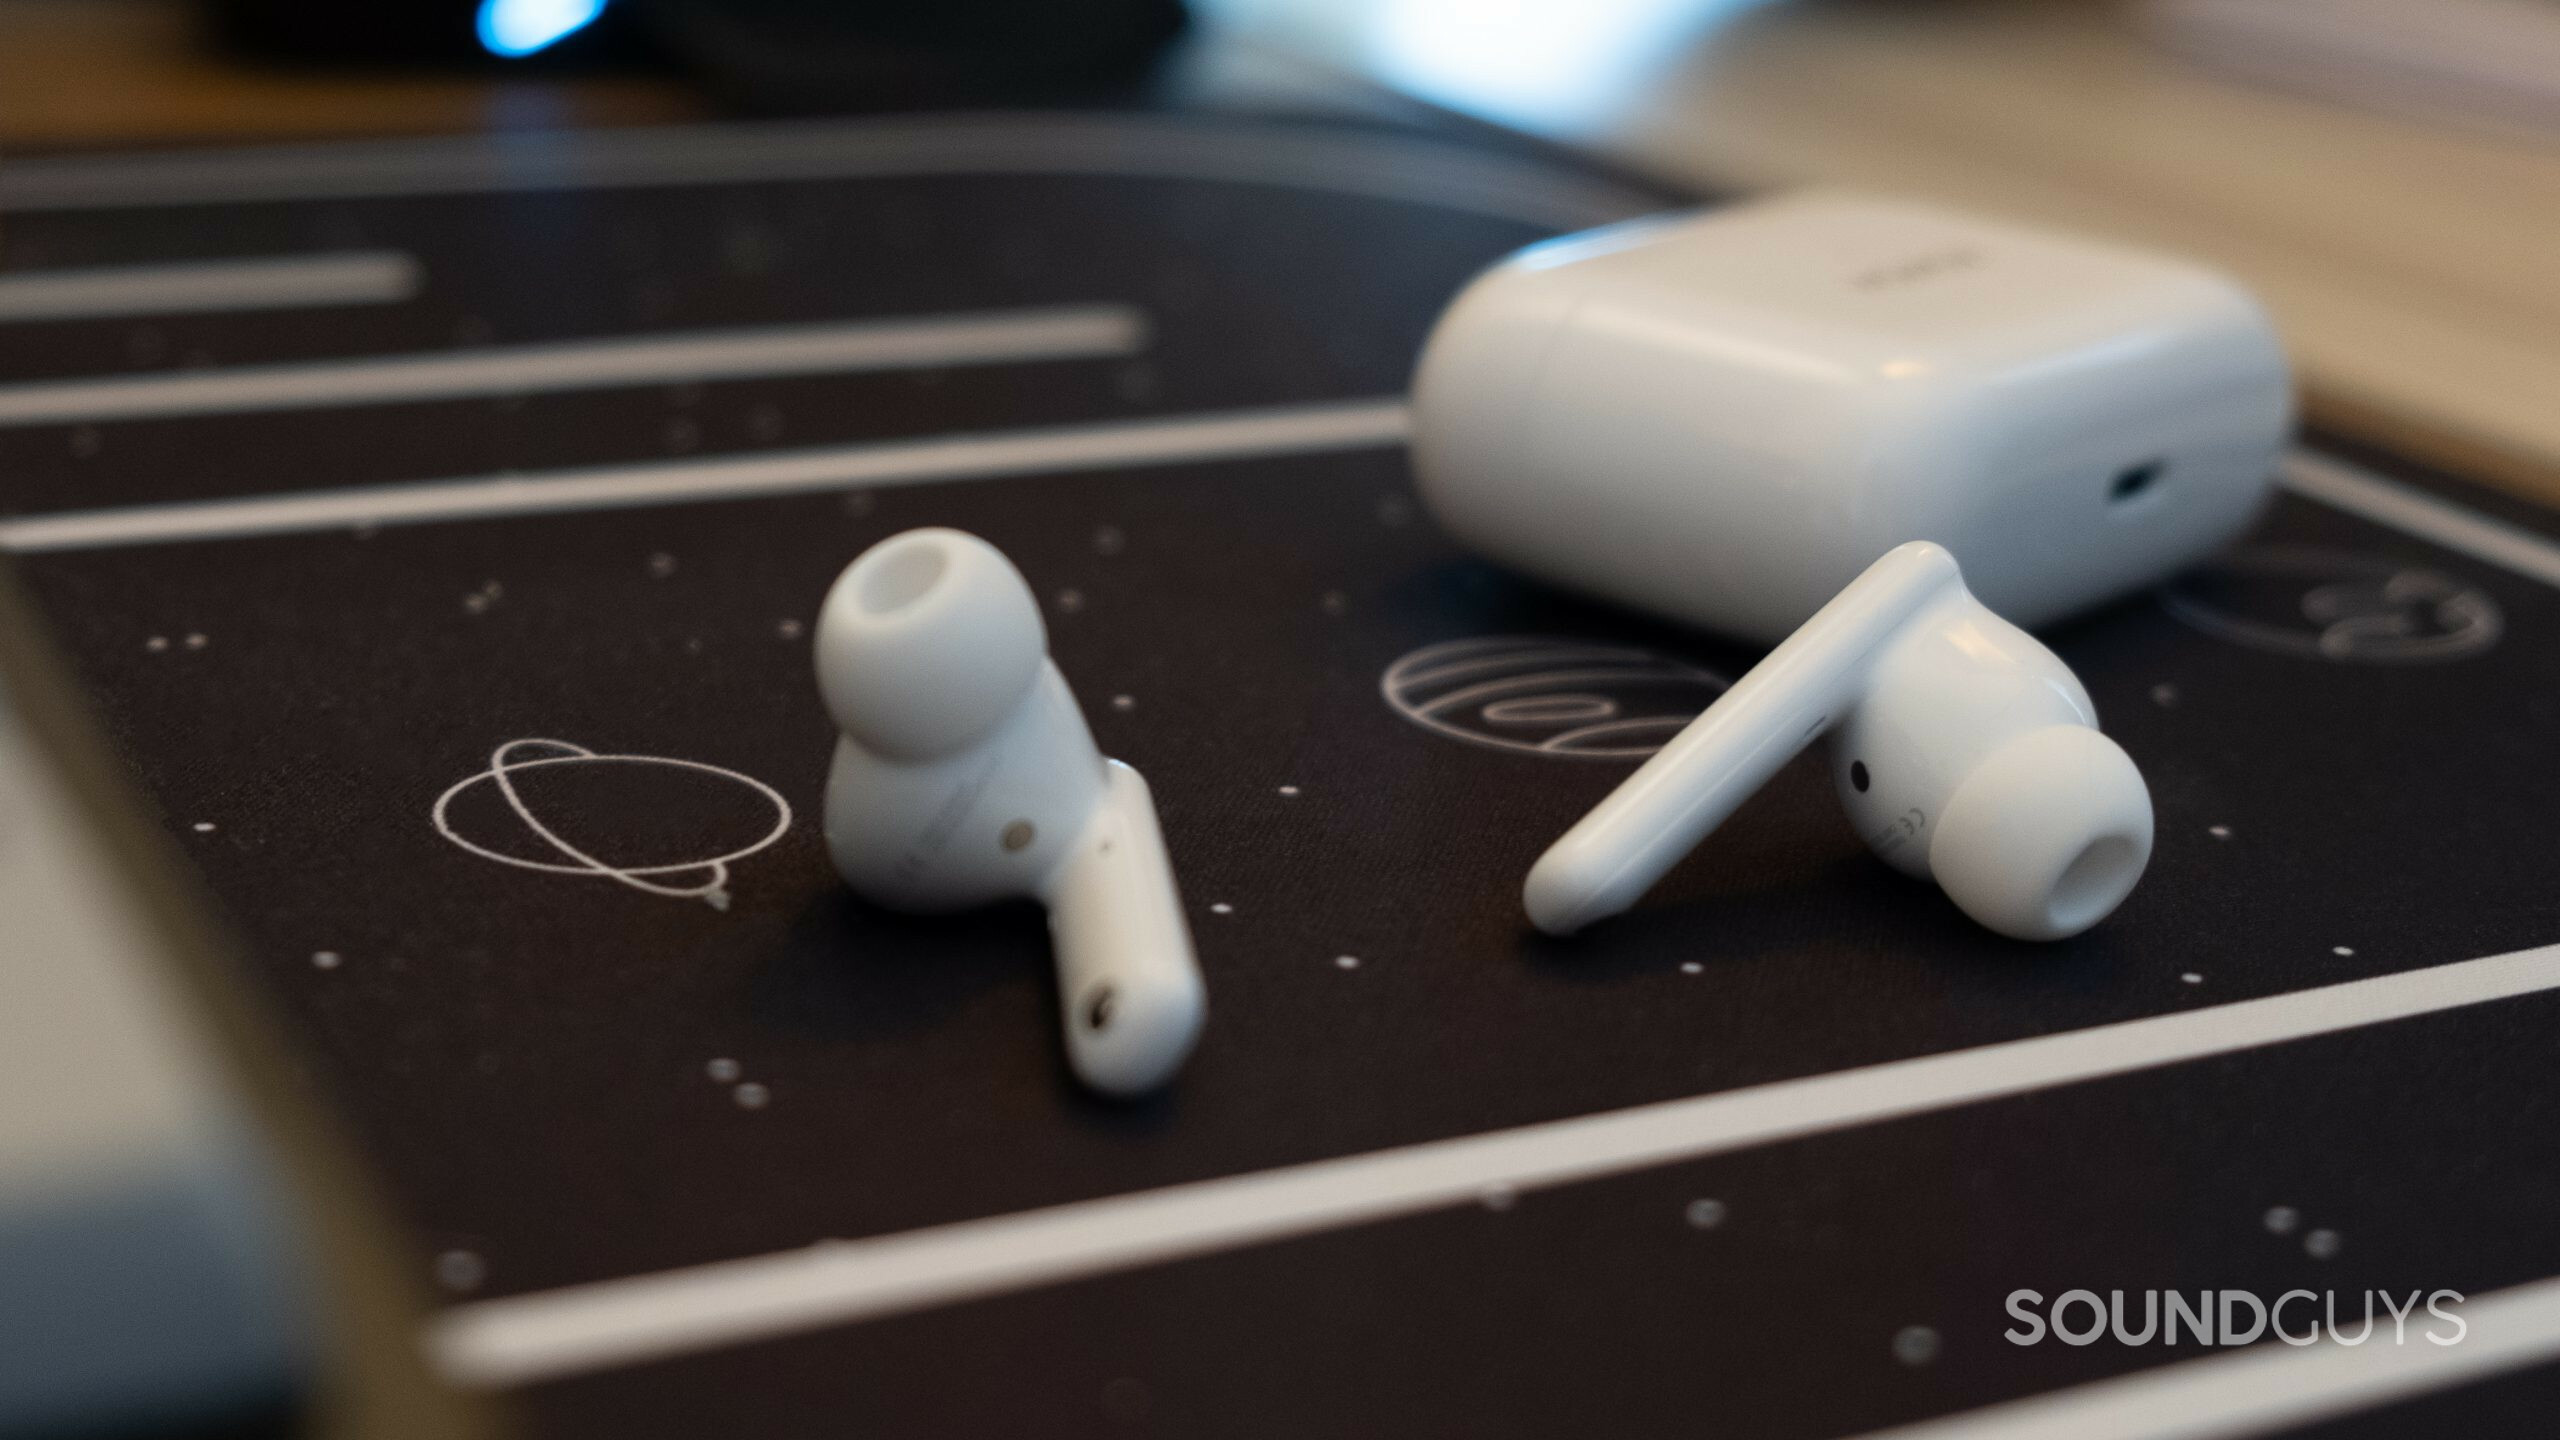 honor earbuds 2 lite rest on a space background covered desk